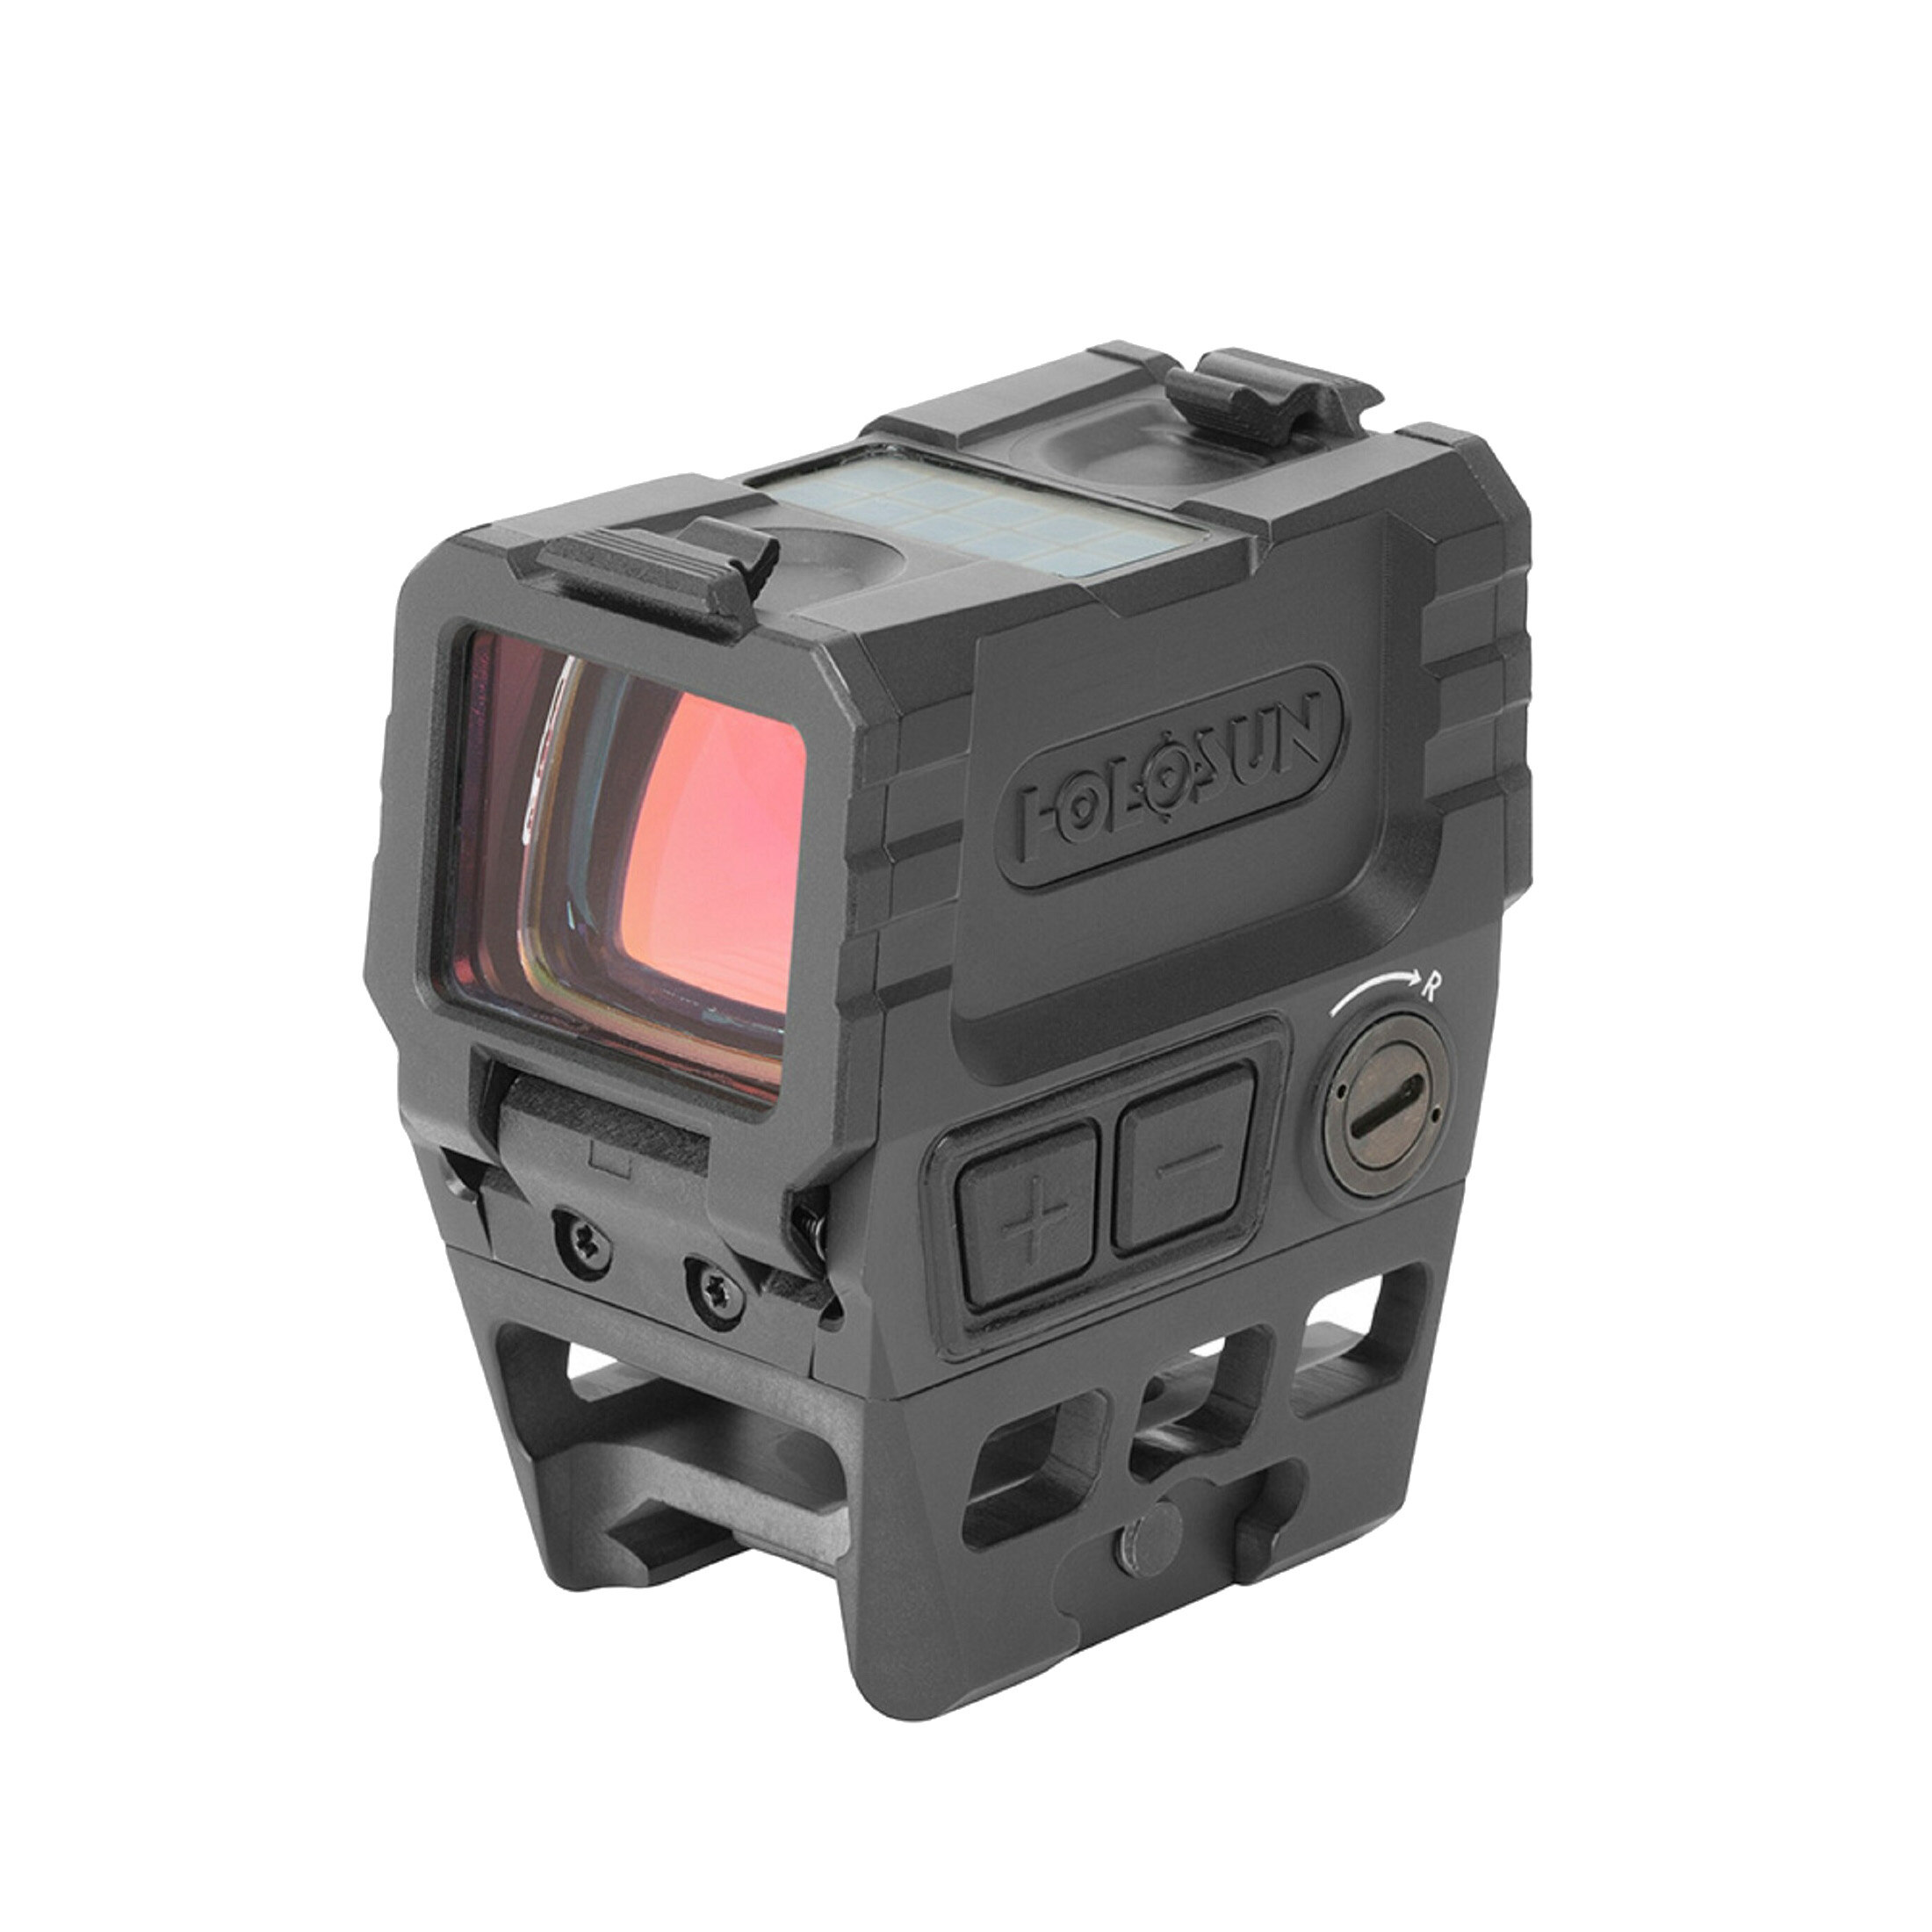 Holosun Classic  AEMS-RD with switchable reticle and aluminium housing, glass flip backs